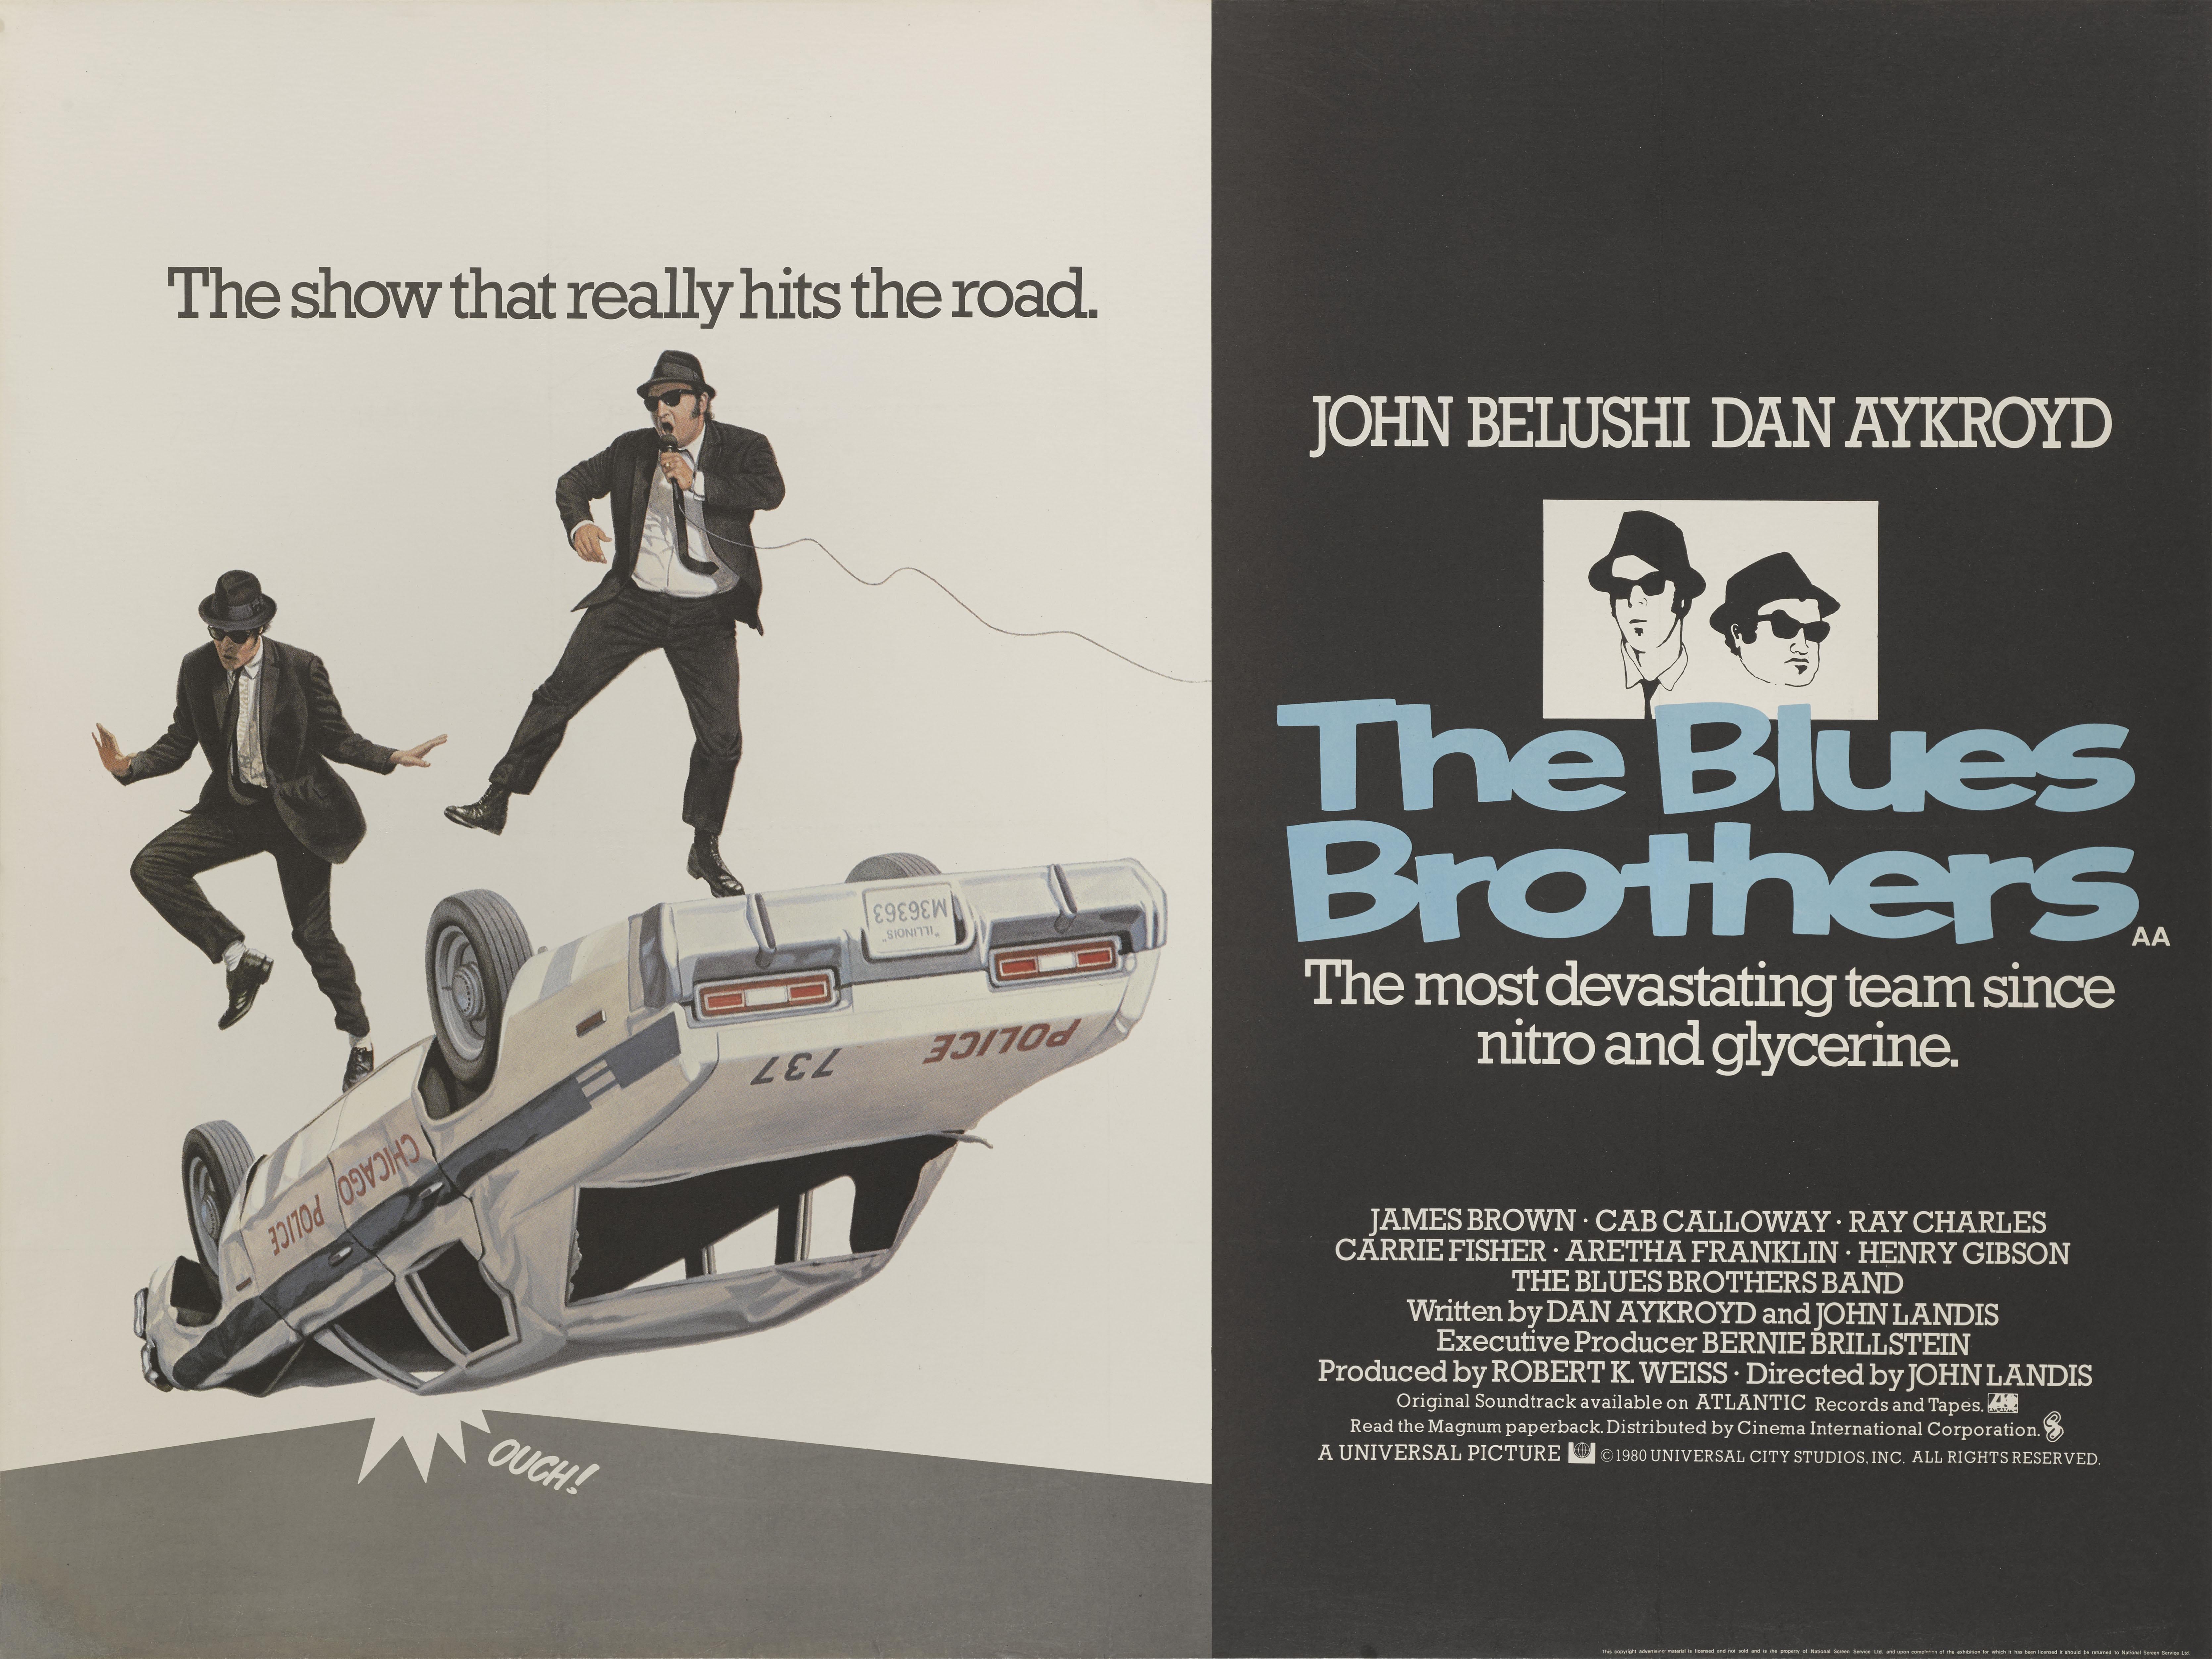 Original British film poster for poster The Blues Brothers 1980
This cult classic was directed by John Landis and written by Landis and Dan Akroyd. The film stars John Belushi, Dan Aykroyd and Cab Calloway. Jake Blues, played by Belushi has just